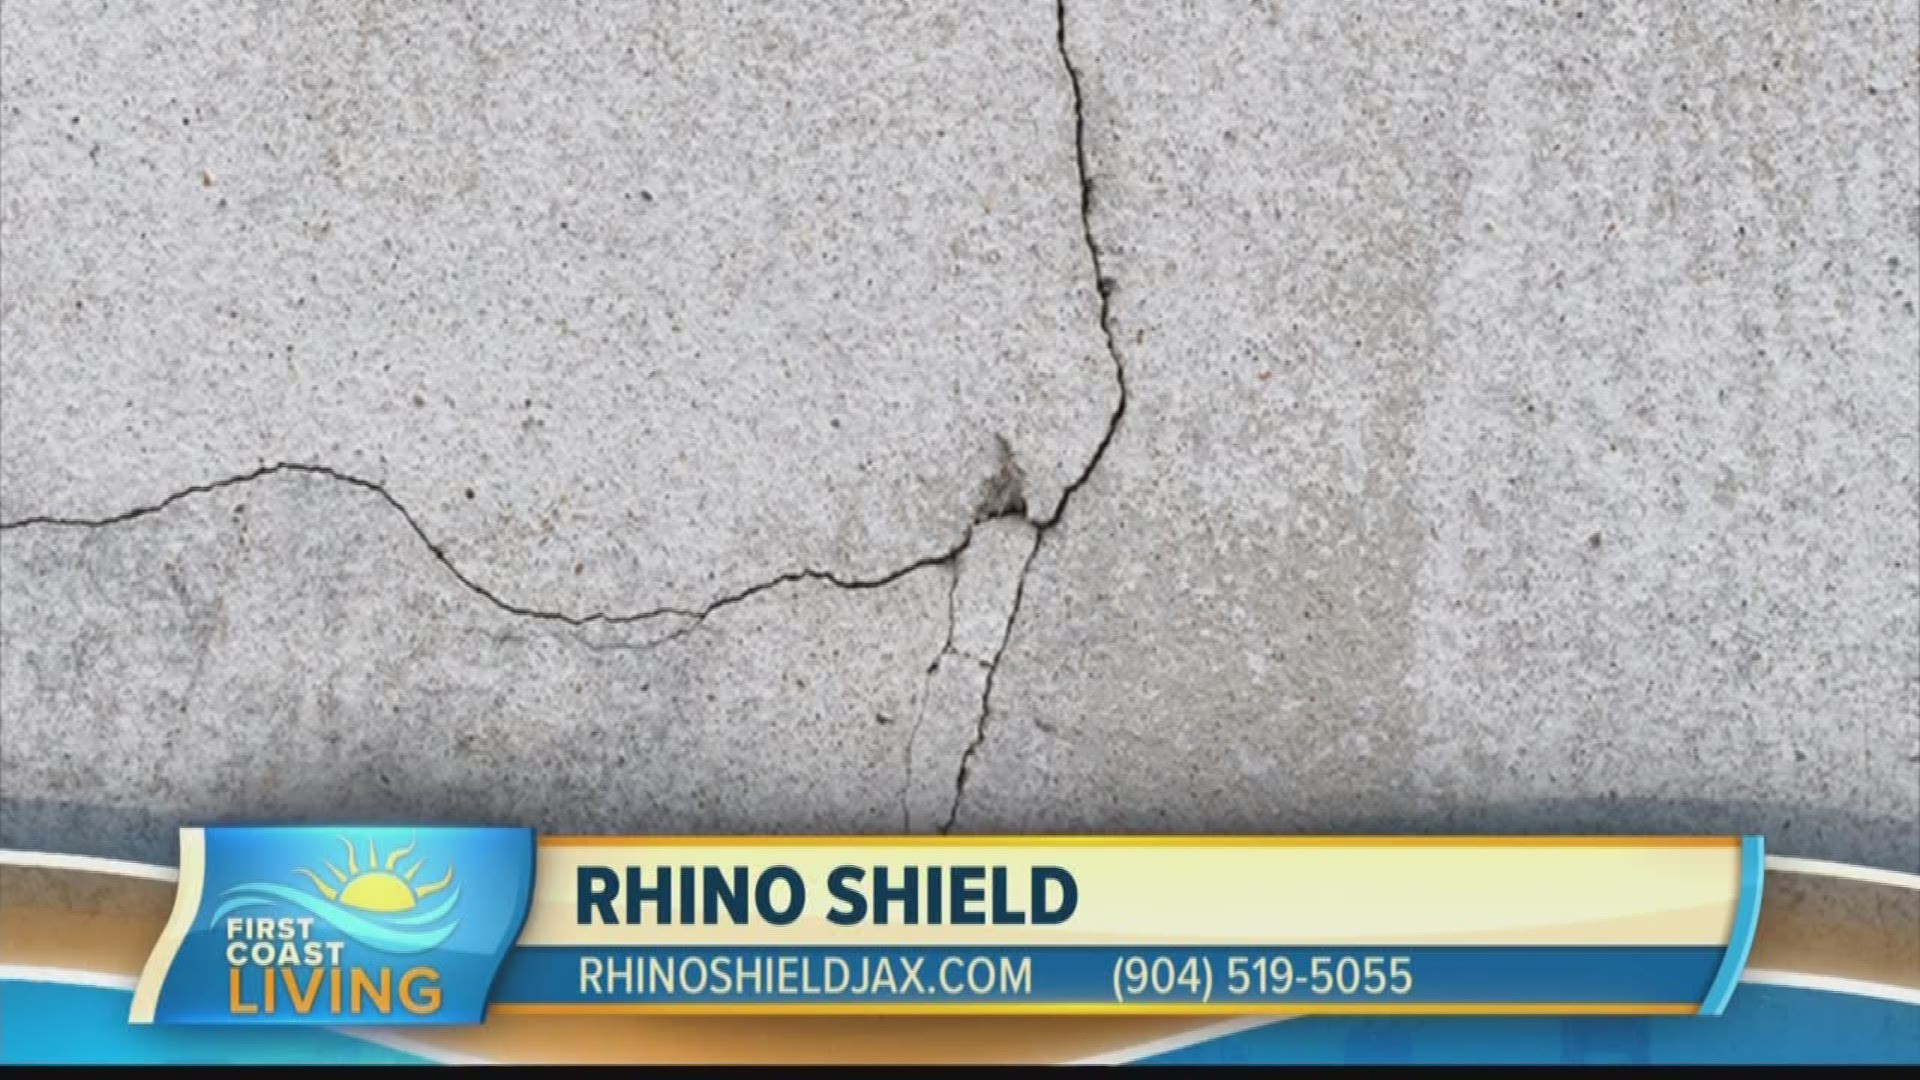 Rick and Jay Mariano with Rhino Shield say they can help make sure you avoid costly damages during a hurricane.